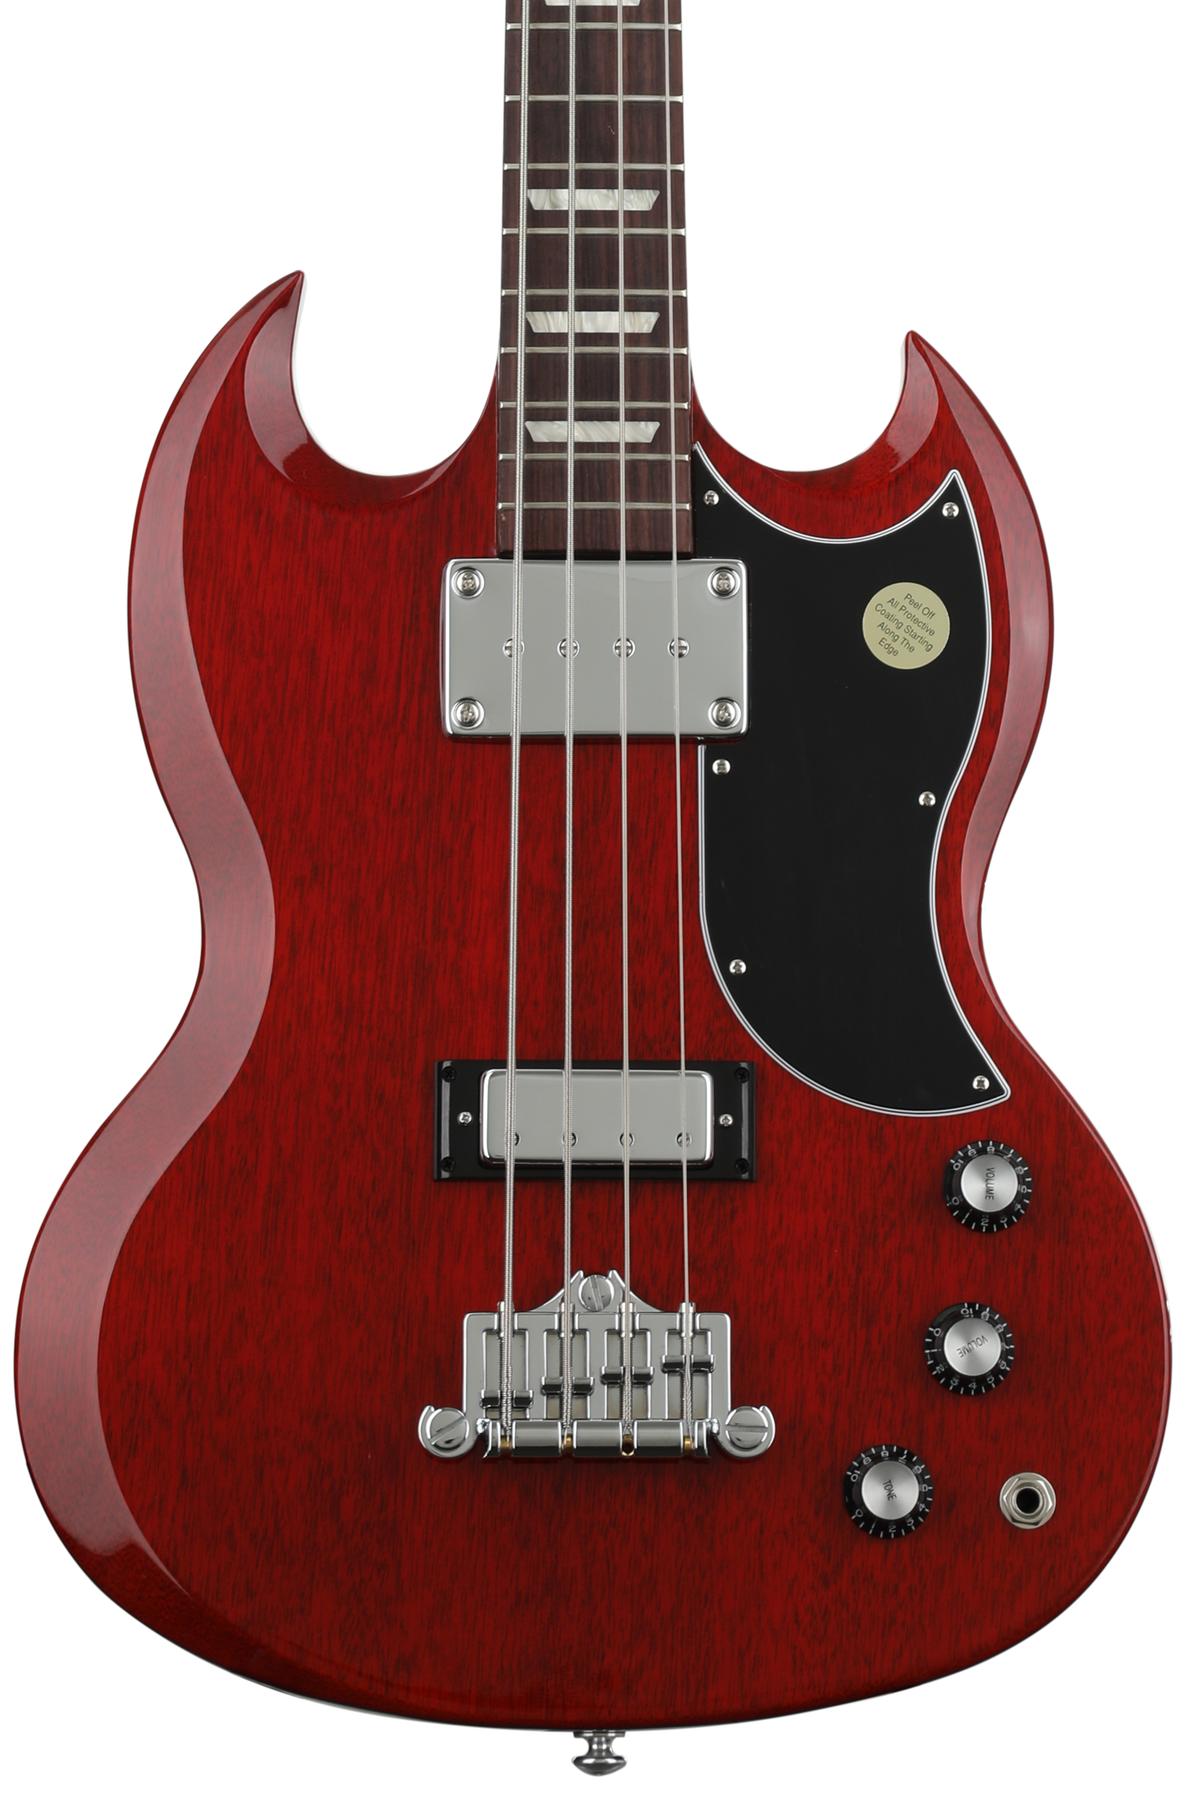 Odysseus ontrouw dief Gibson SG Standard Bass - Heritage Cherry | Sweetwater